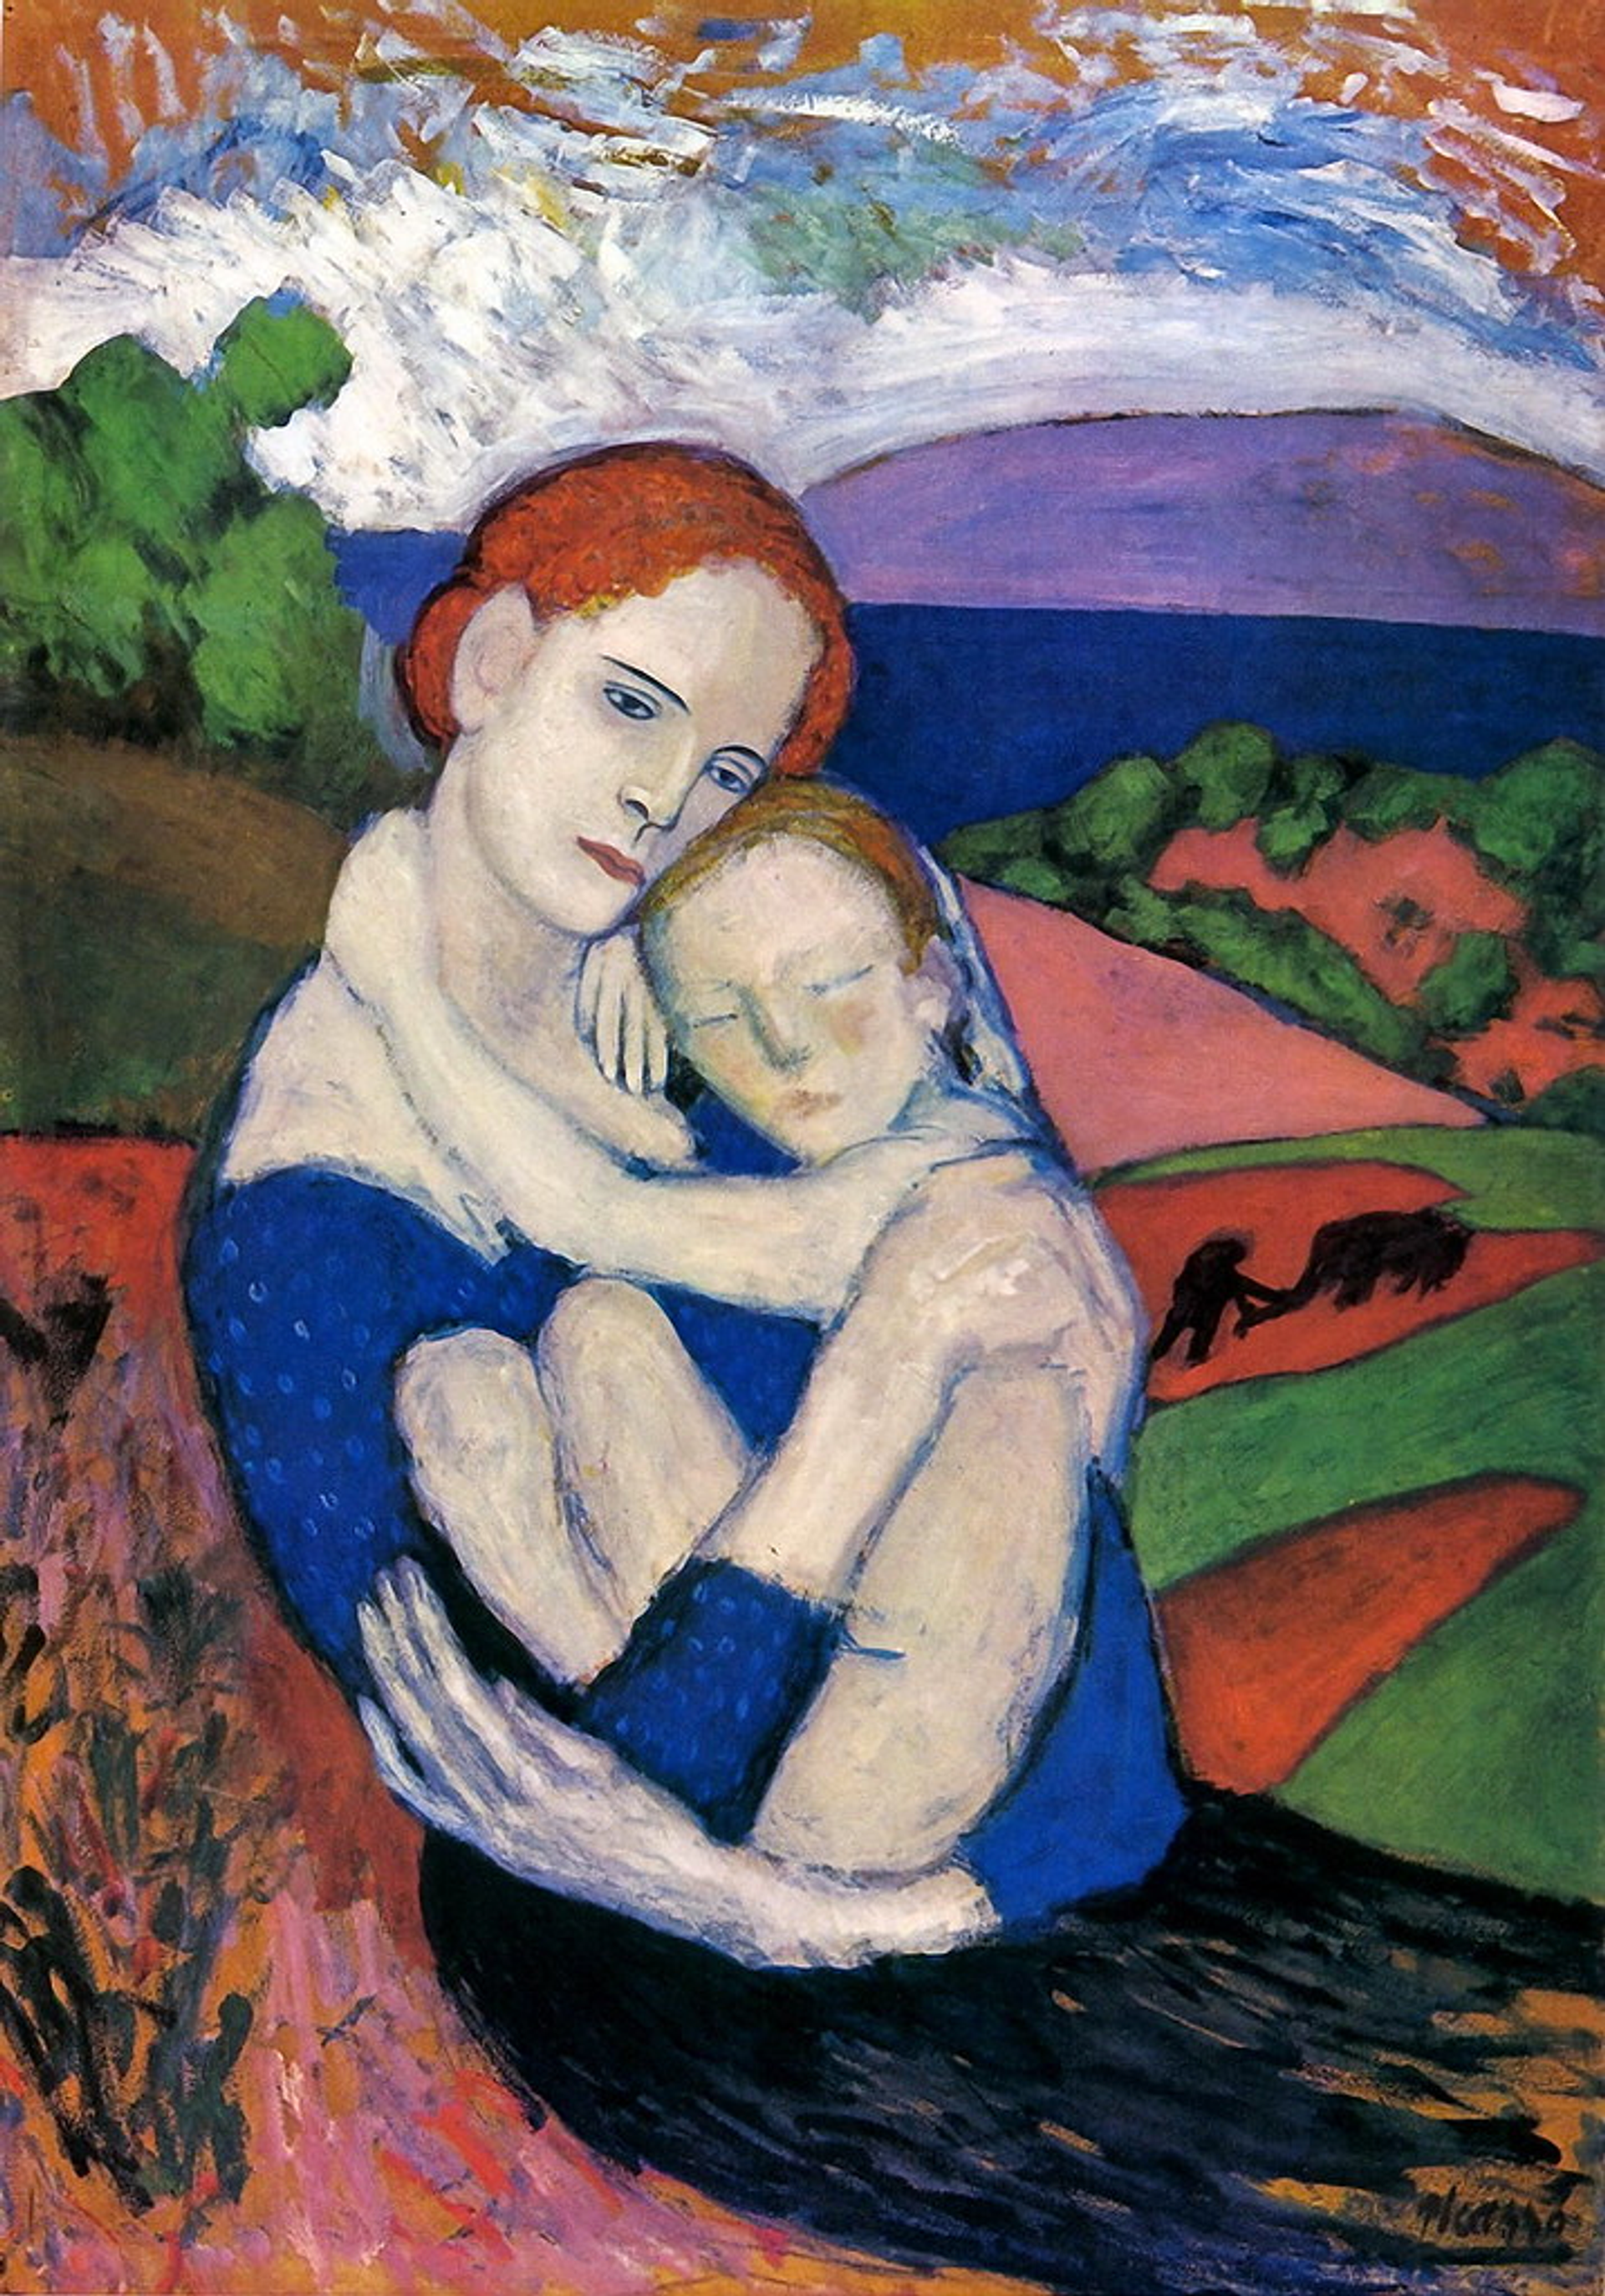 This image shows a red-headed woman cradling her child, against a landscaped backdrop.